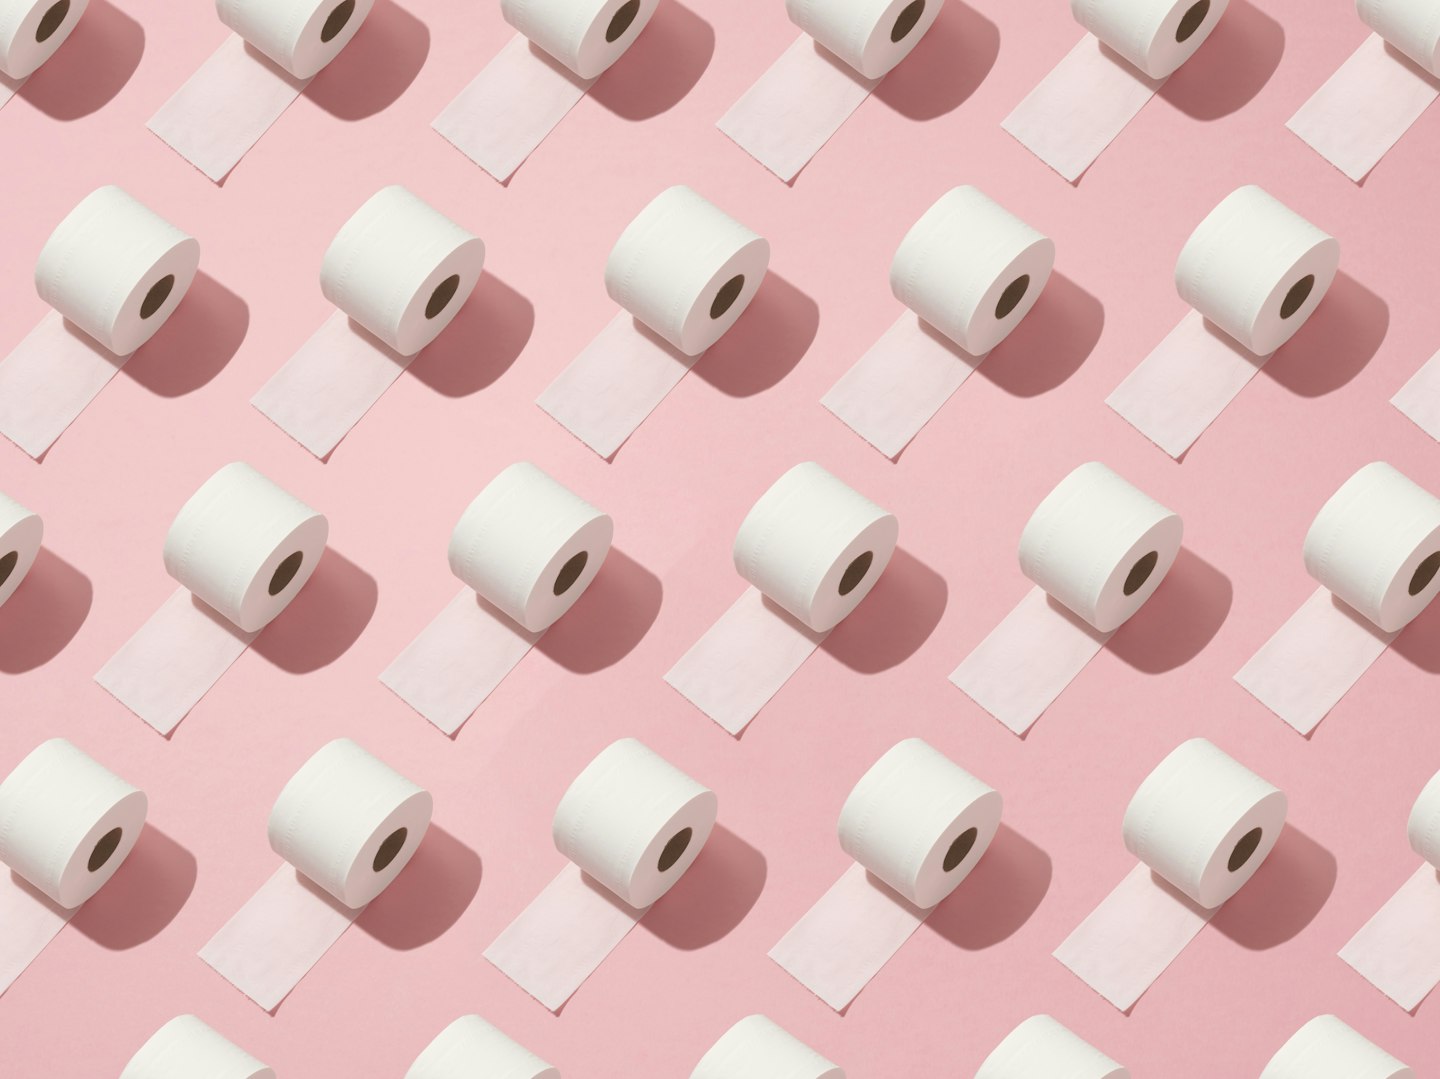 Toilet rolls on pink background